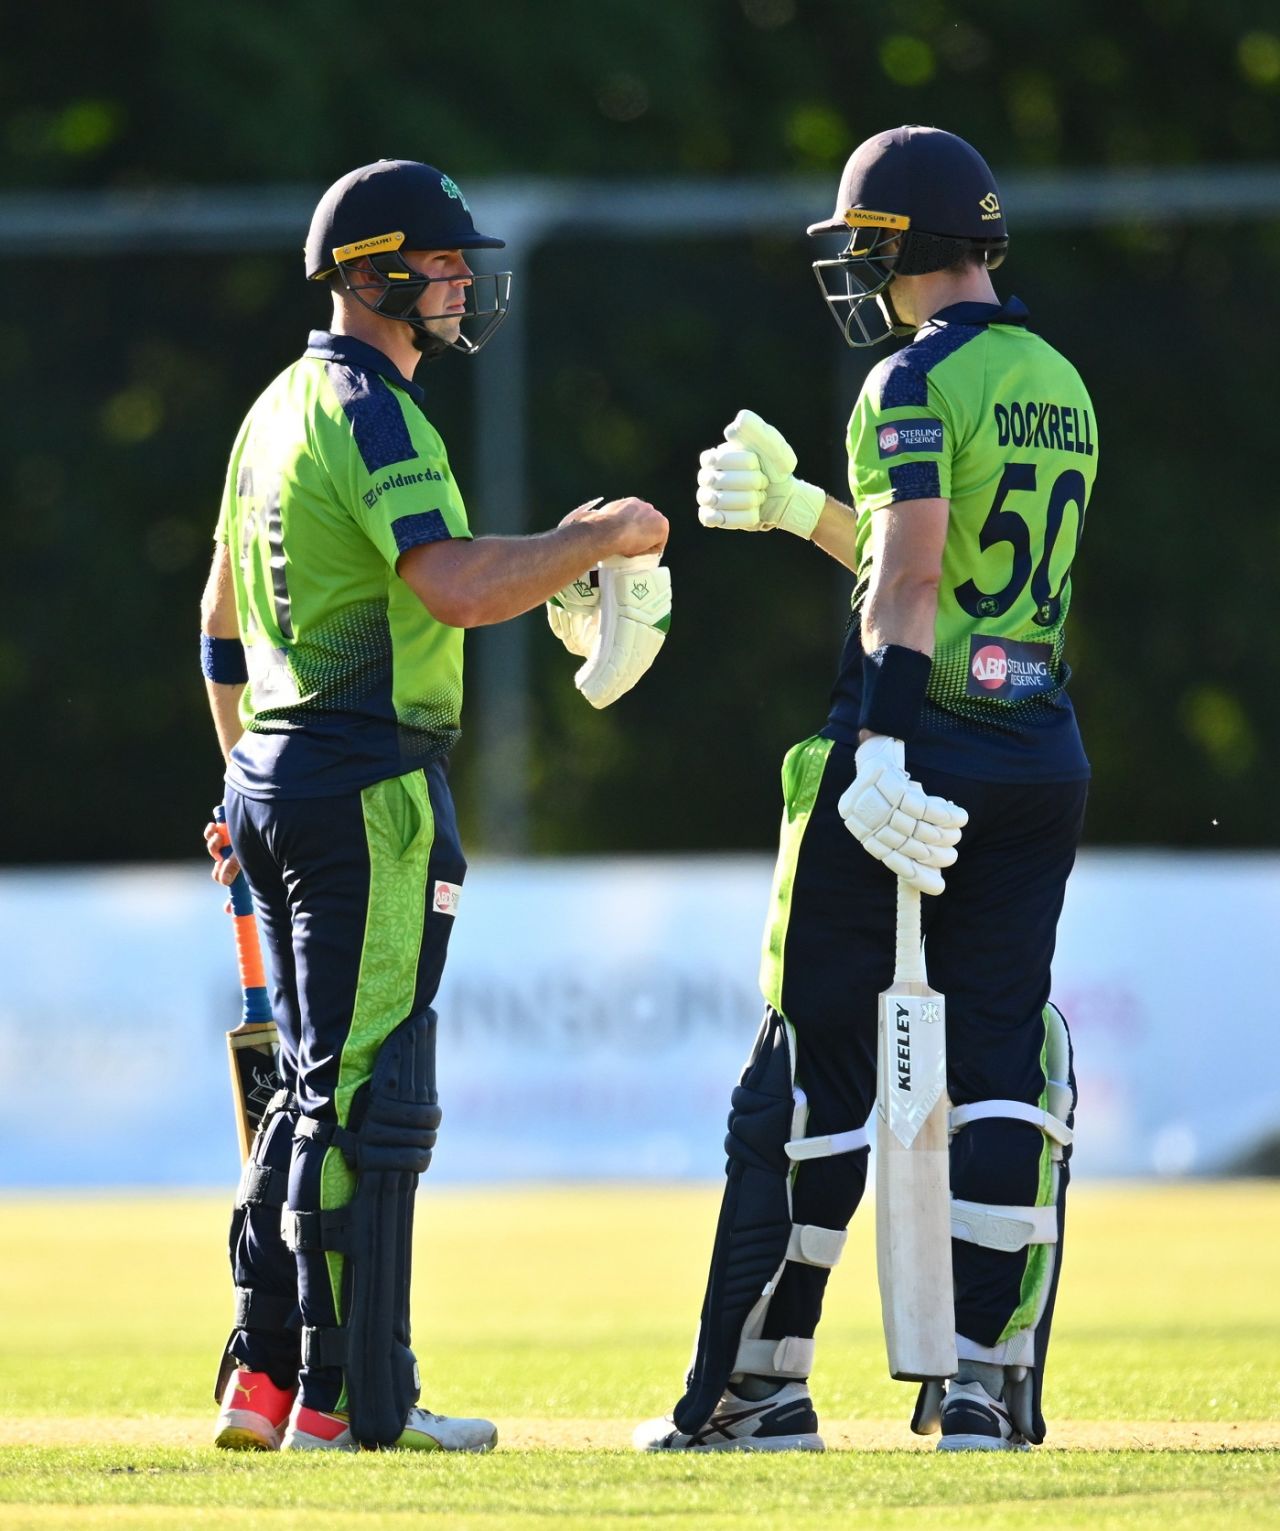 Fionn Hand and George Dockrell were involved in a 74-run eighth-wicket partnership, Ireland vs Afghanistan, 3rd T20I, Belfast, August 12, 2022